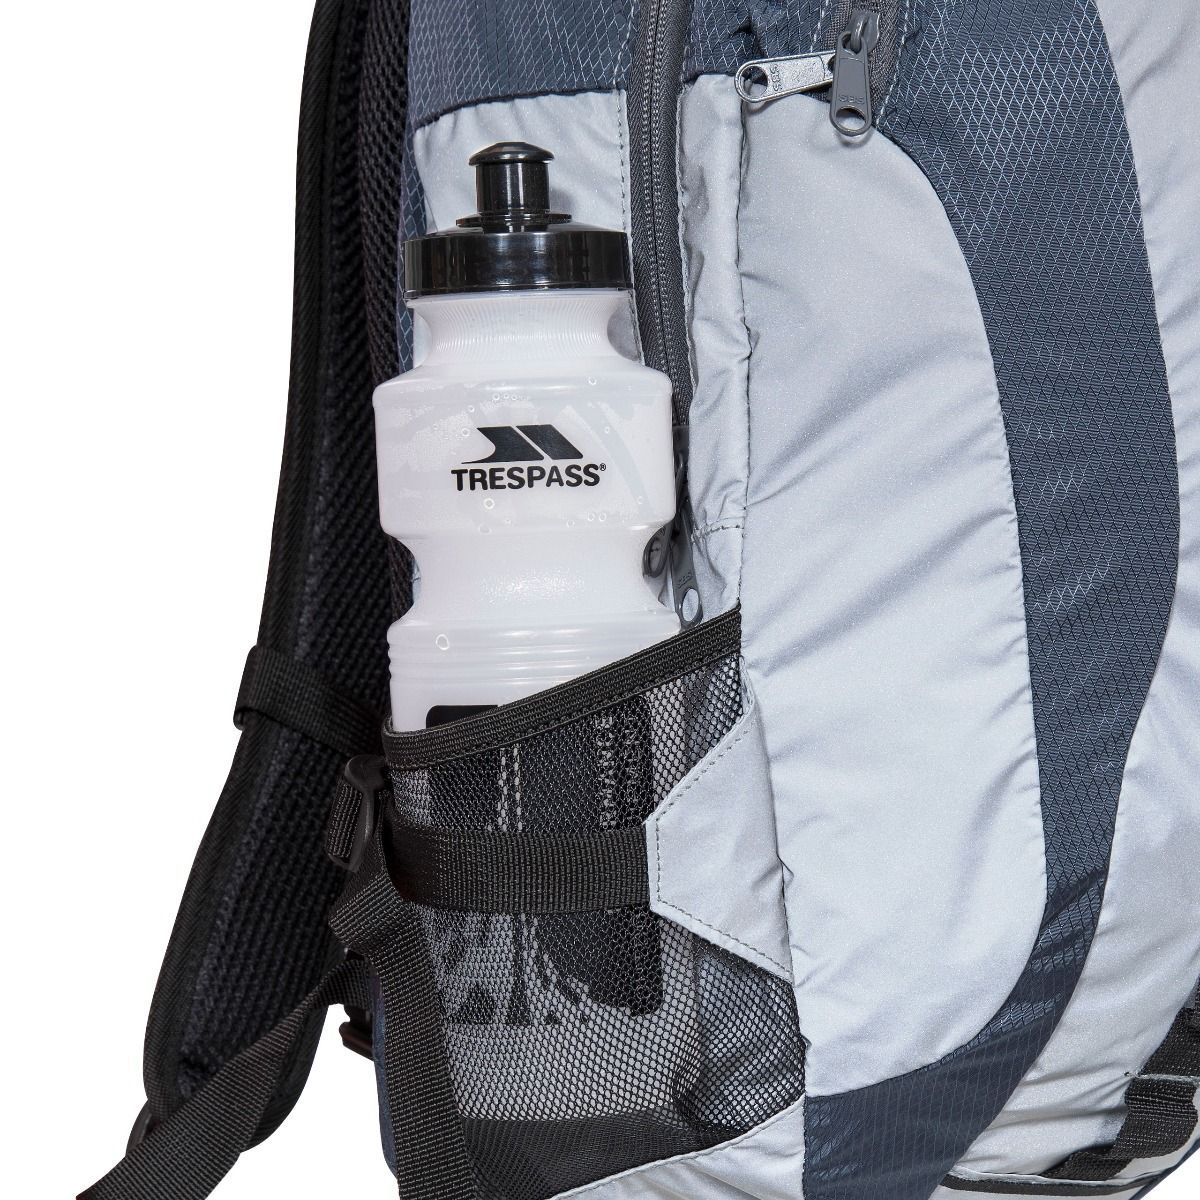 100% Polyamide. 20 litre rucksack. Fully padded back panel. Attachment loops and daisy chain. Reflective hits. Quick access pockets. Hydration compatible.